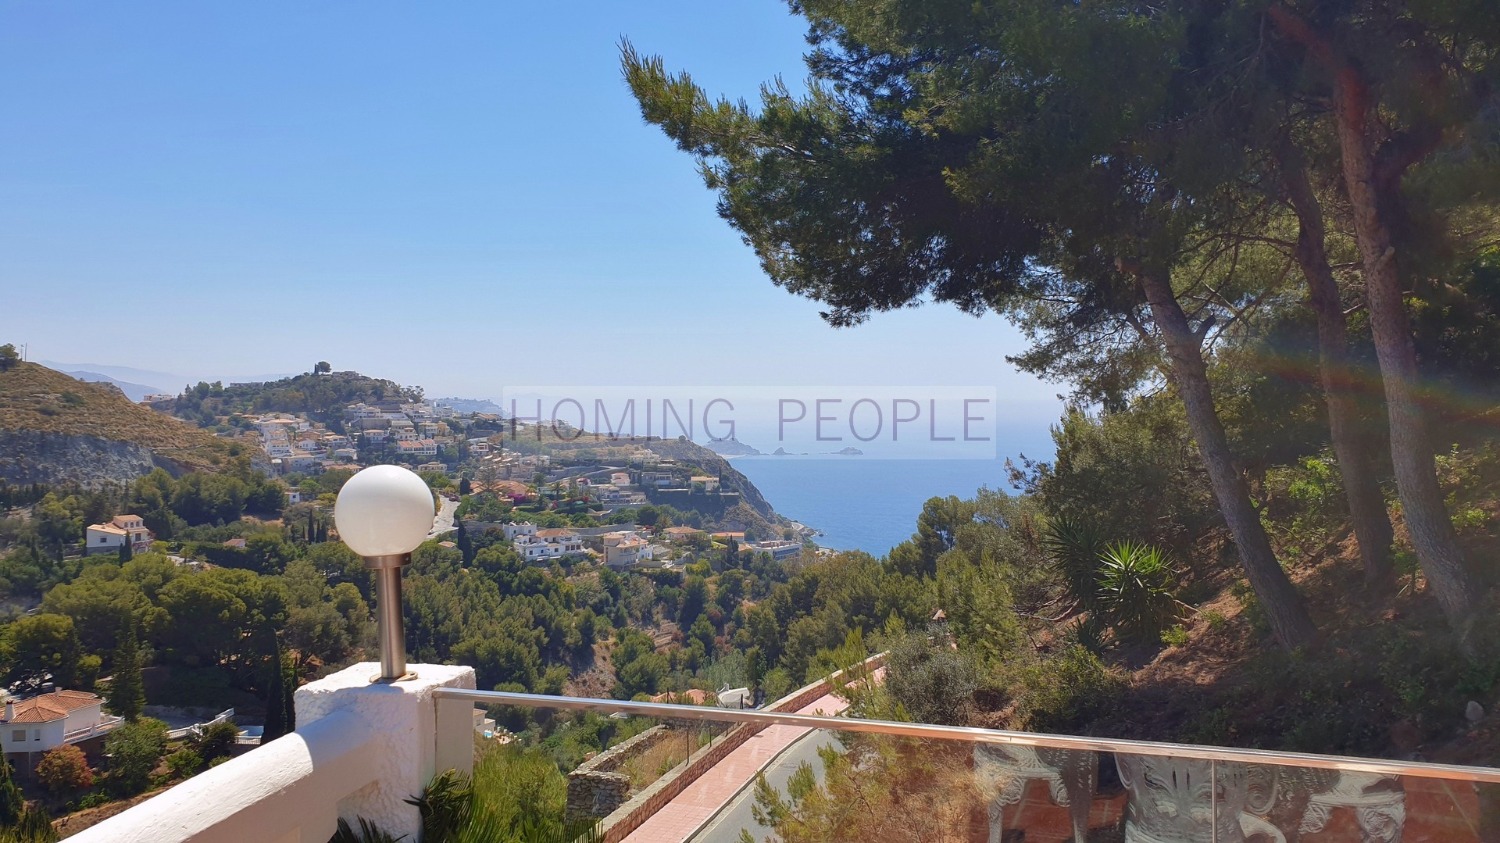 Villa with pool and sea views, located in very sought-after urbanisation